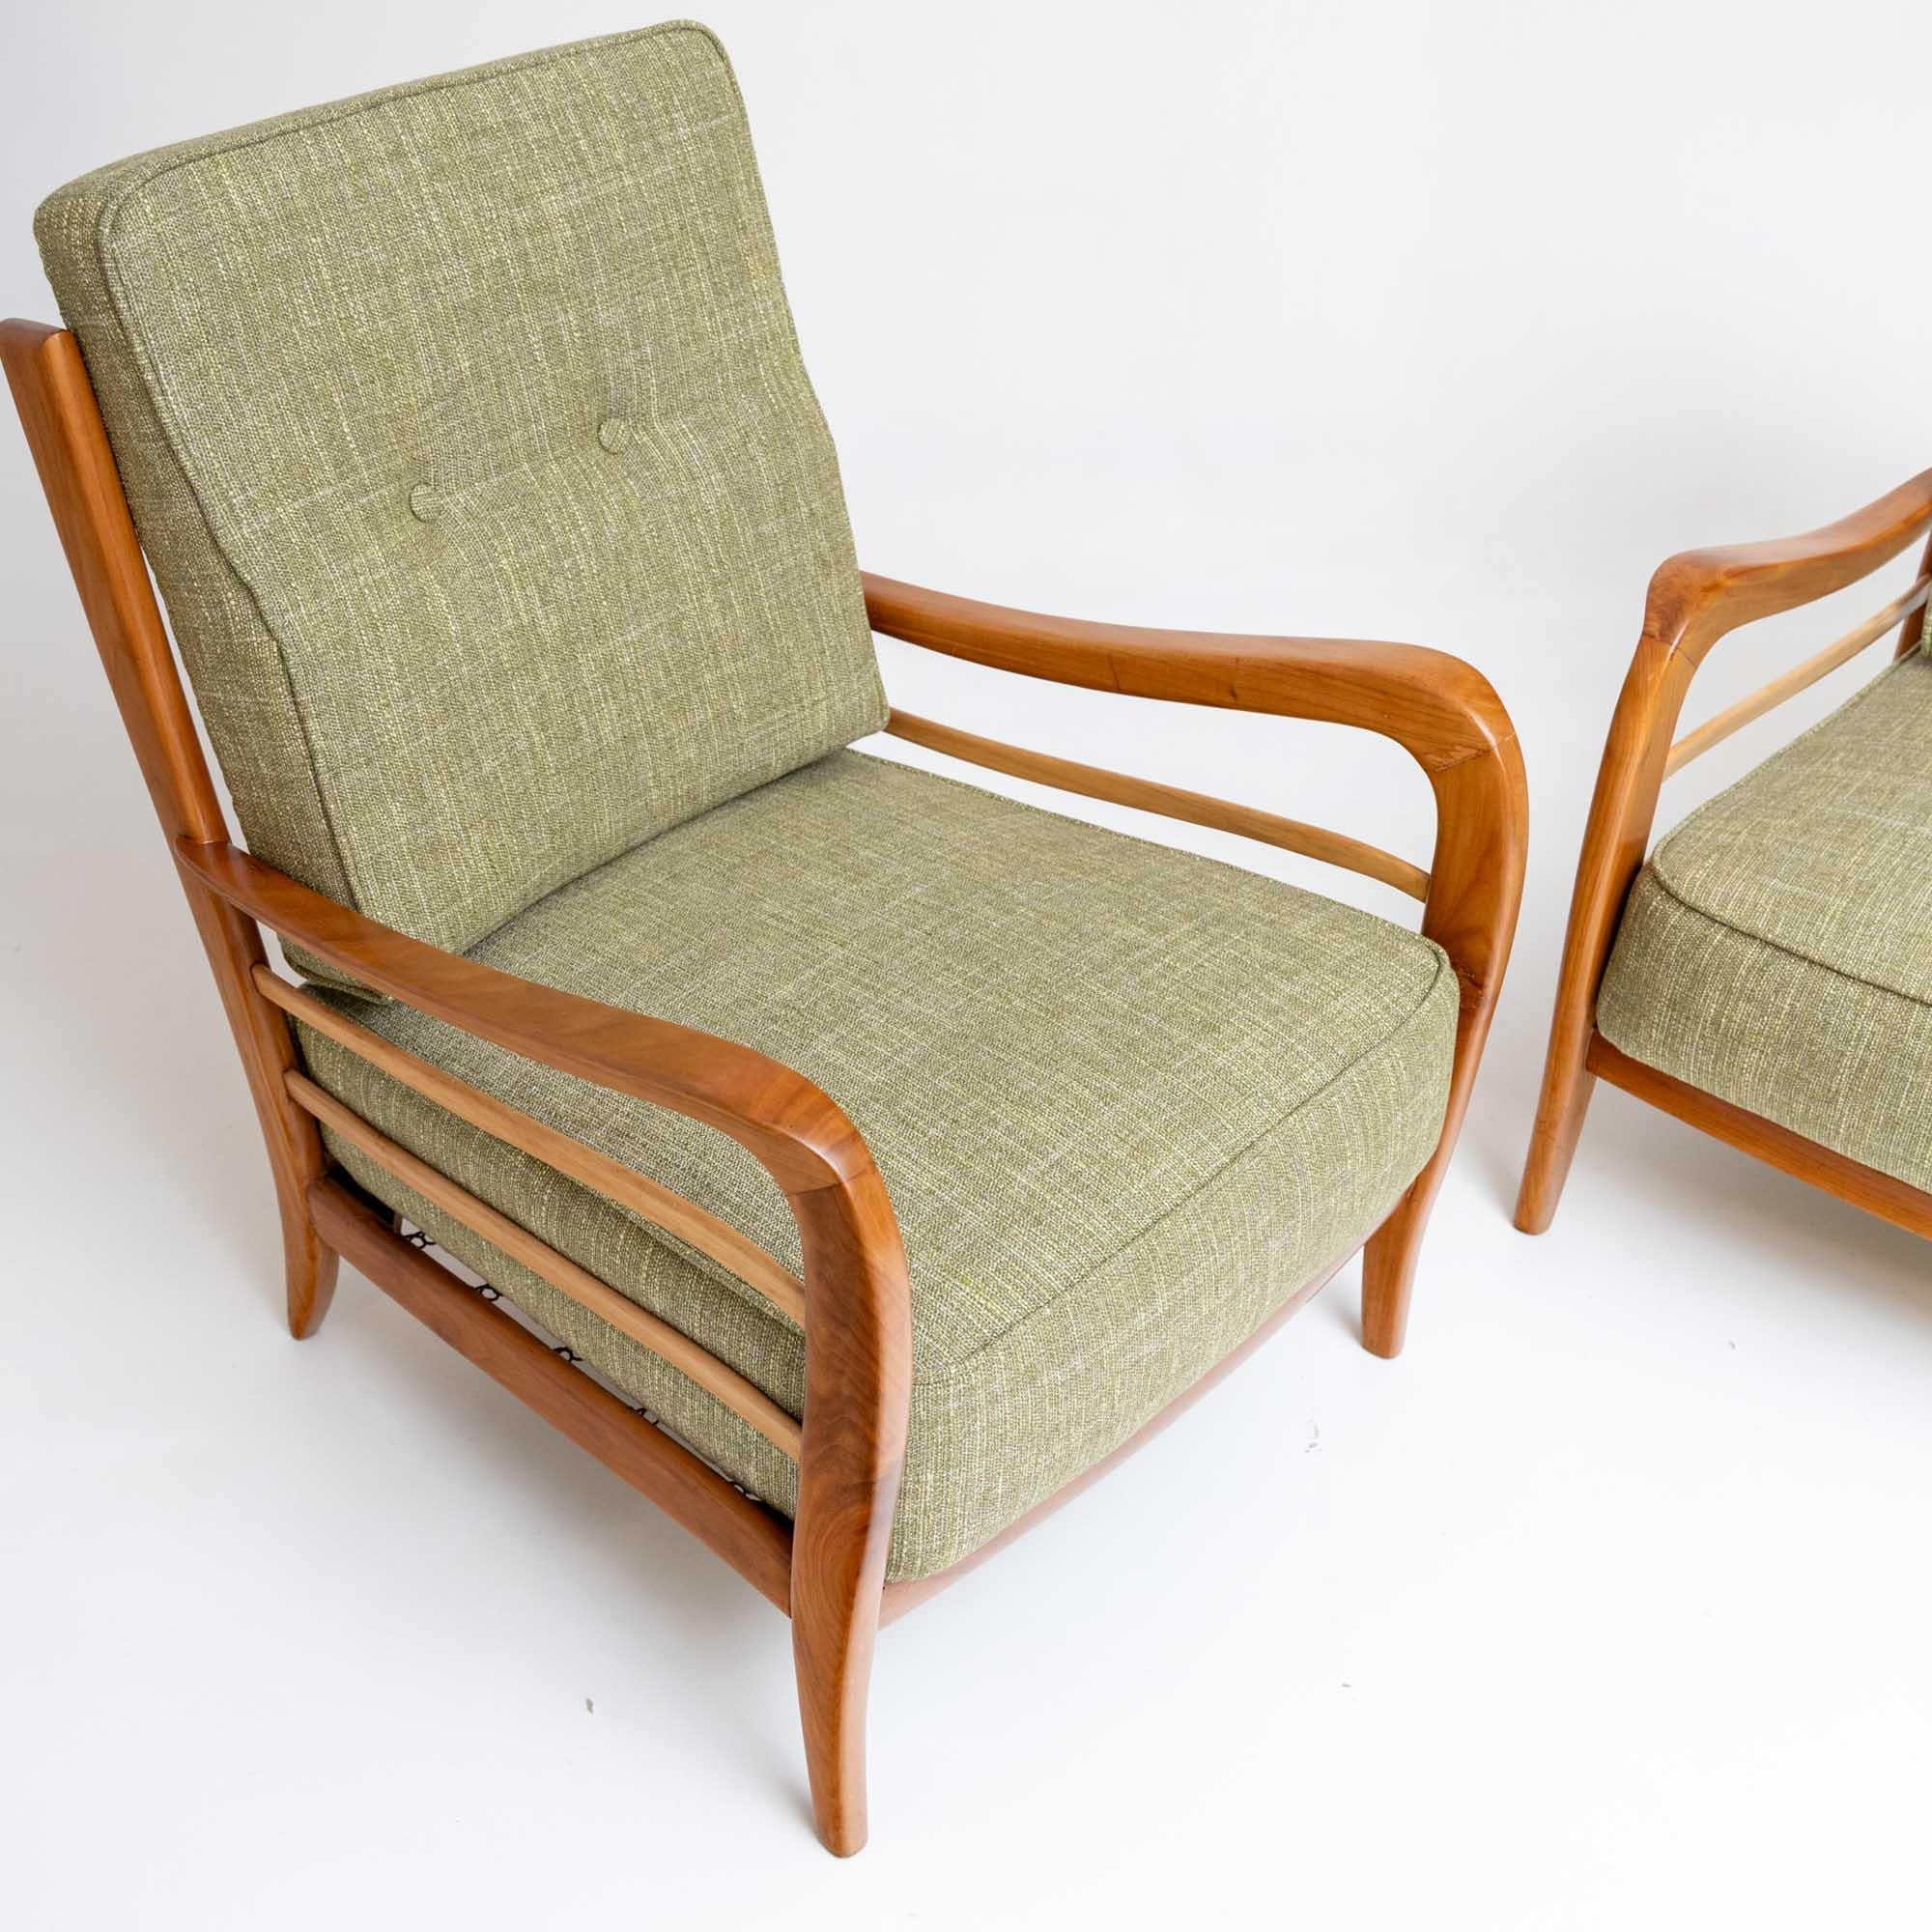 Mid-20th Century Pair of Lounge Chairs in Cherry, green Upholstery attr. Paolo Buffa, Italy 1950s